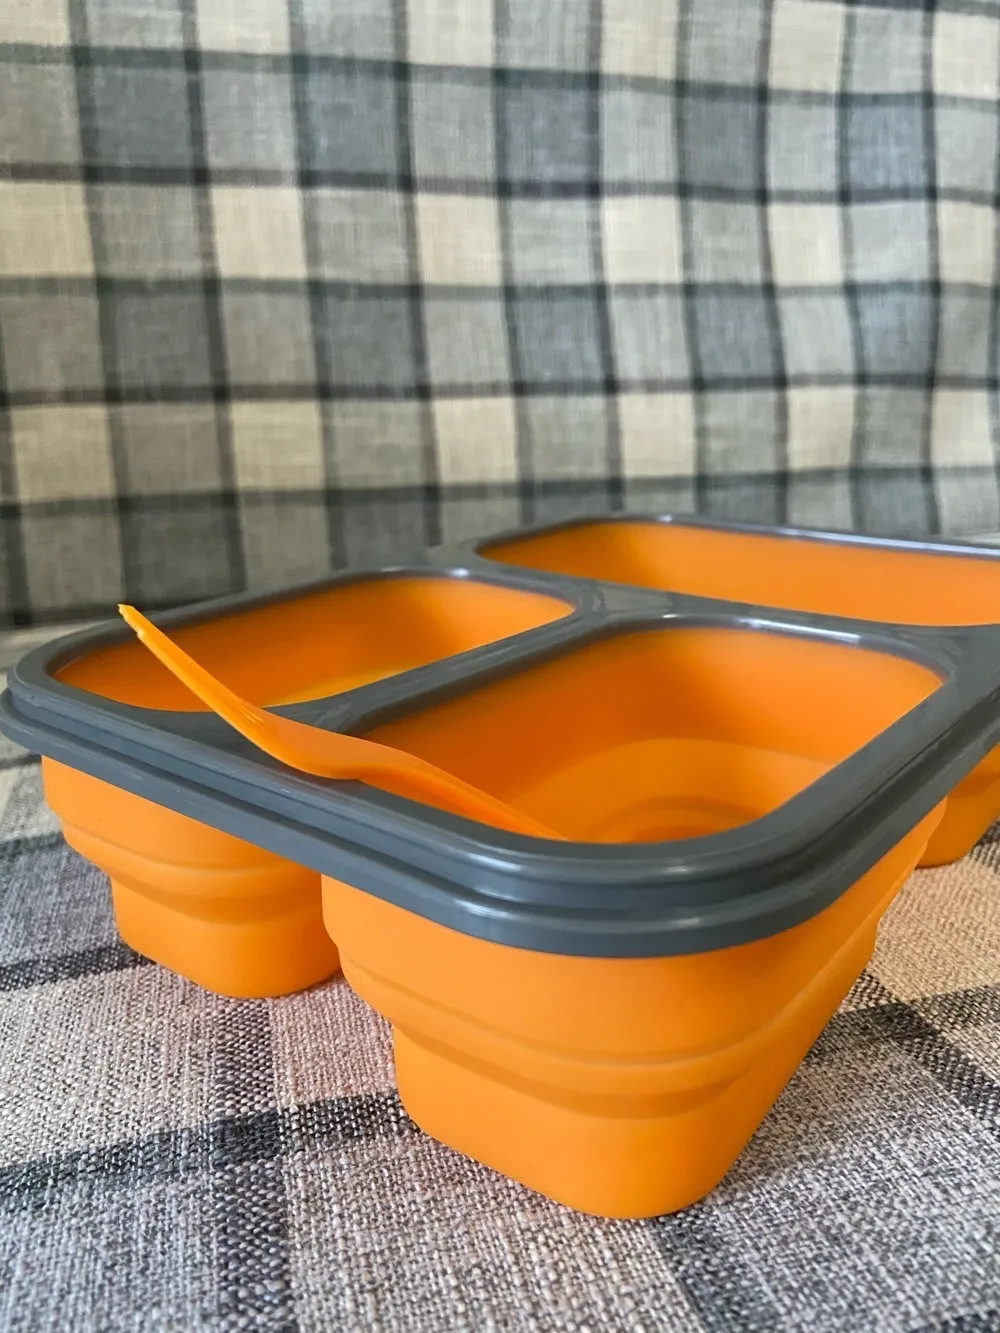 1100ML Silicone Food Container Portable Bento Lunch Box Eco Friendly School Storage Food Grade Collapsible Bento Box Lunchbox T200710